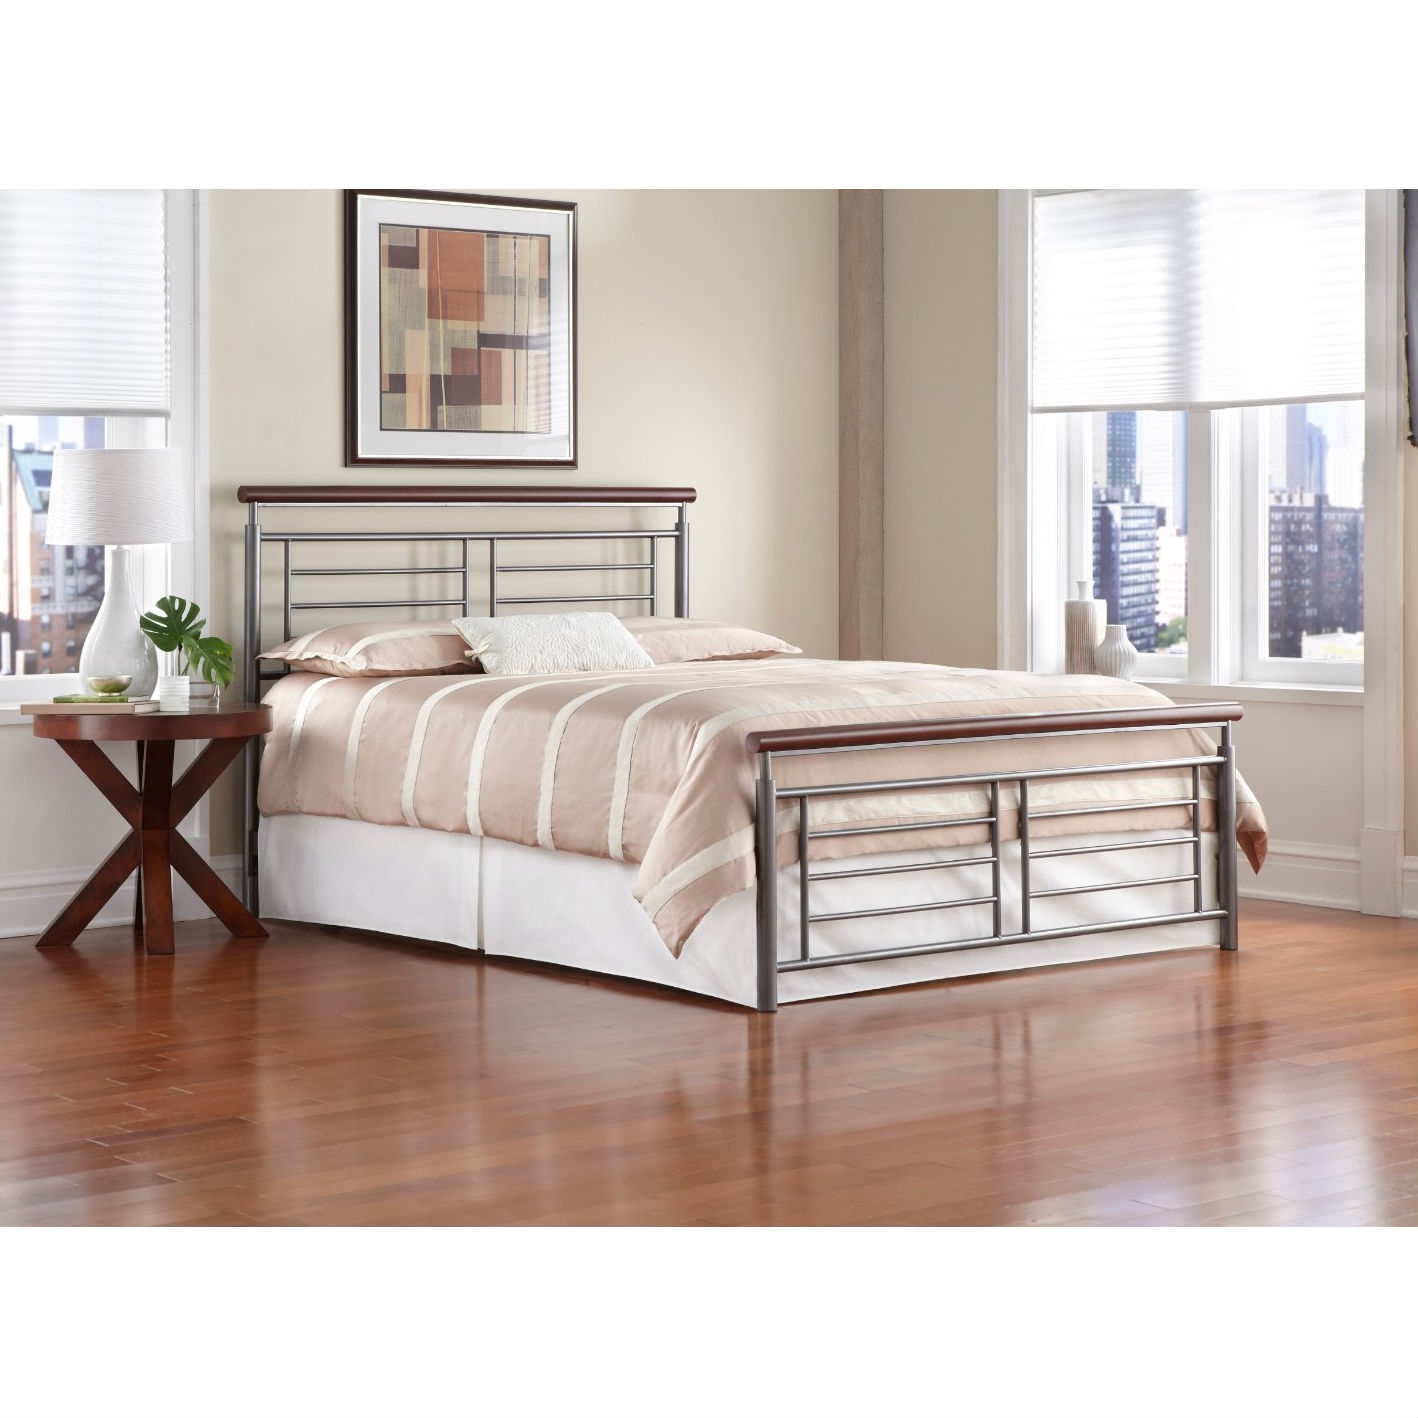 King size Contemporary Metal Bed in Silver / Cherry Finish